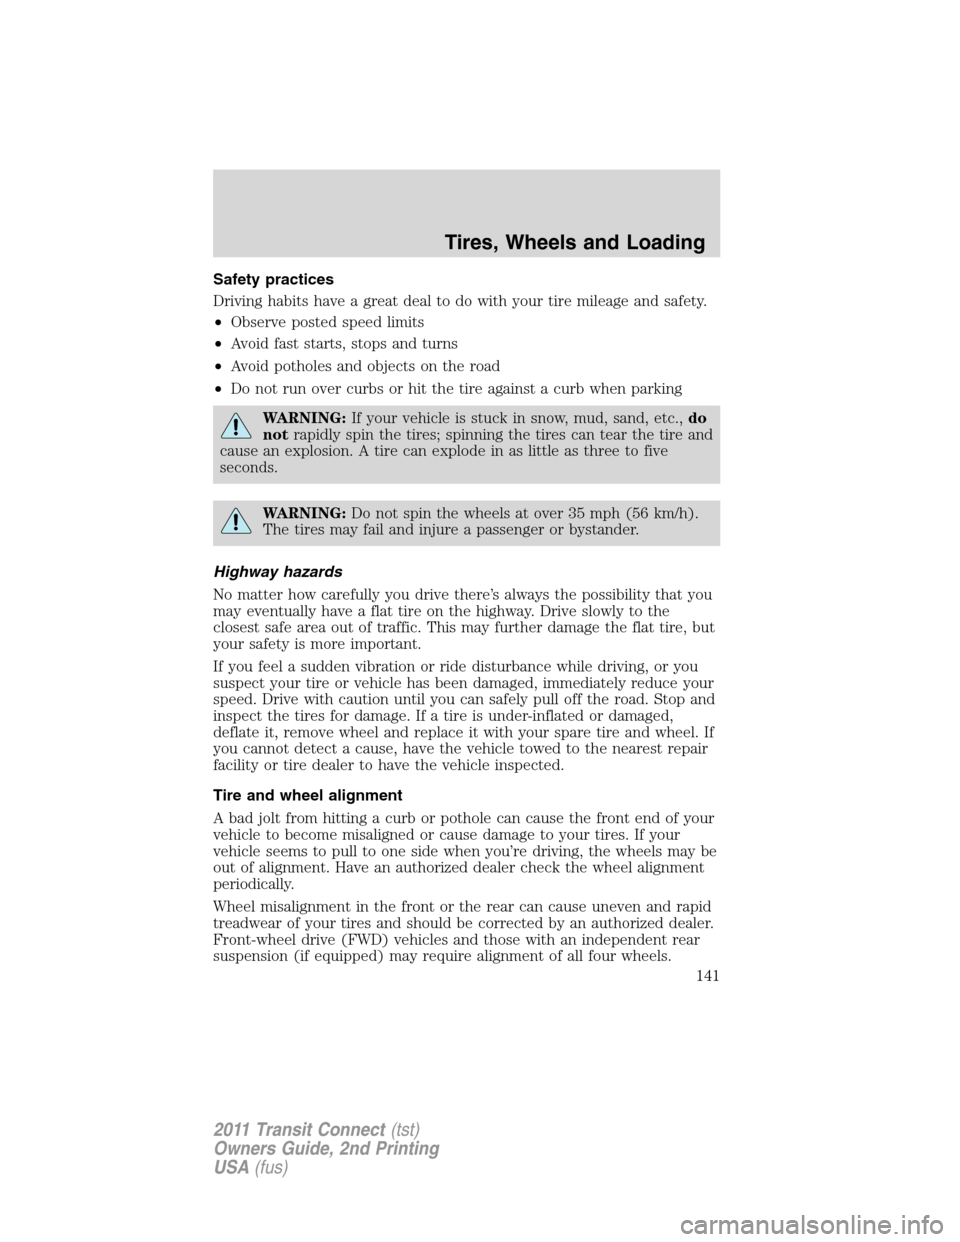 FORD TRANSIT CONNECT 2011 1.G User Guide Safety practices
Driving habits have a great deal to do with your tire mileage and safety.
•Observe posted speed limits
•Avoid fast starts, stops and turns
•Avoid potholes and objects on the roa